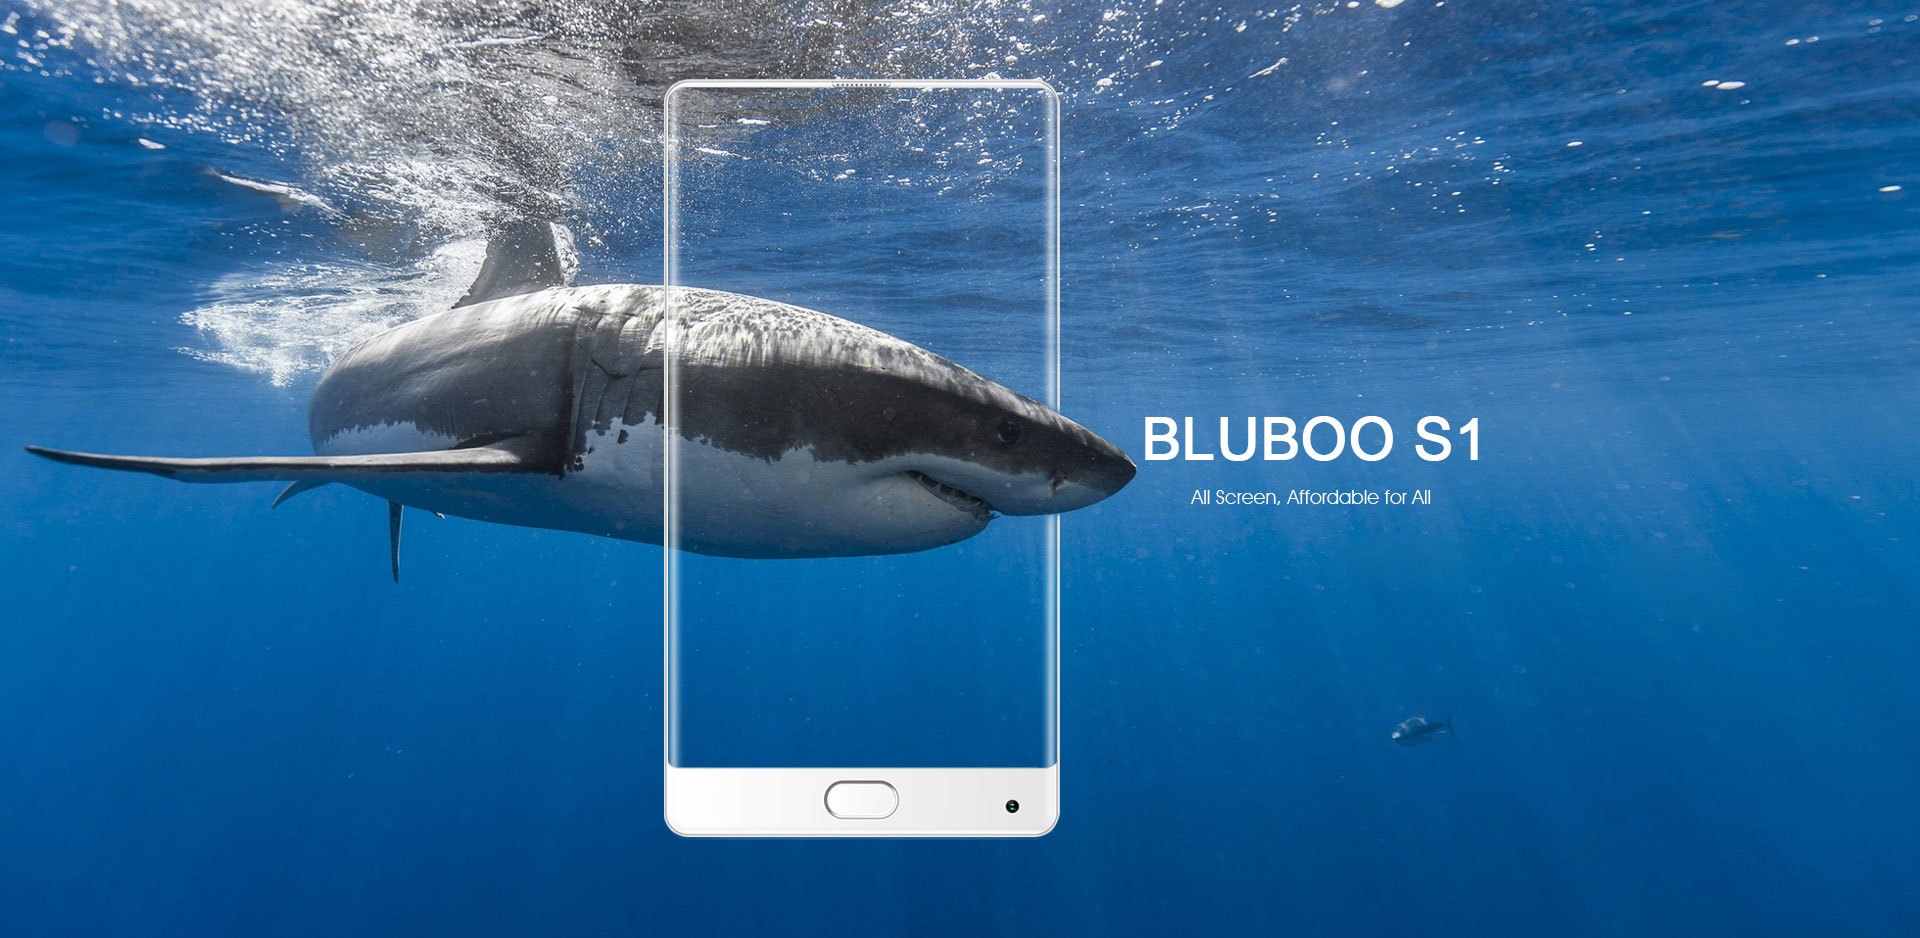 A detailed story about the smartphone BLUBOO S1